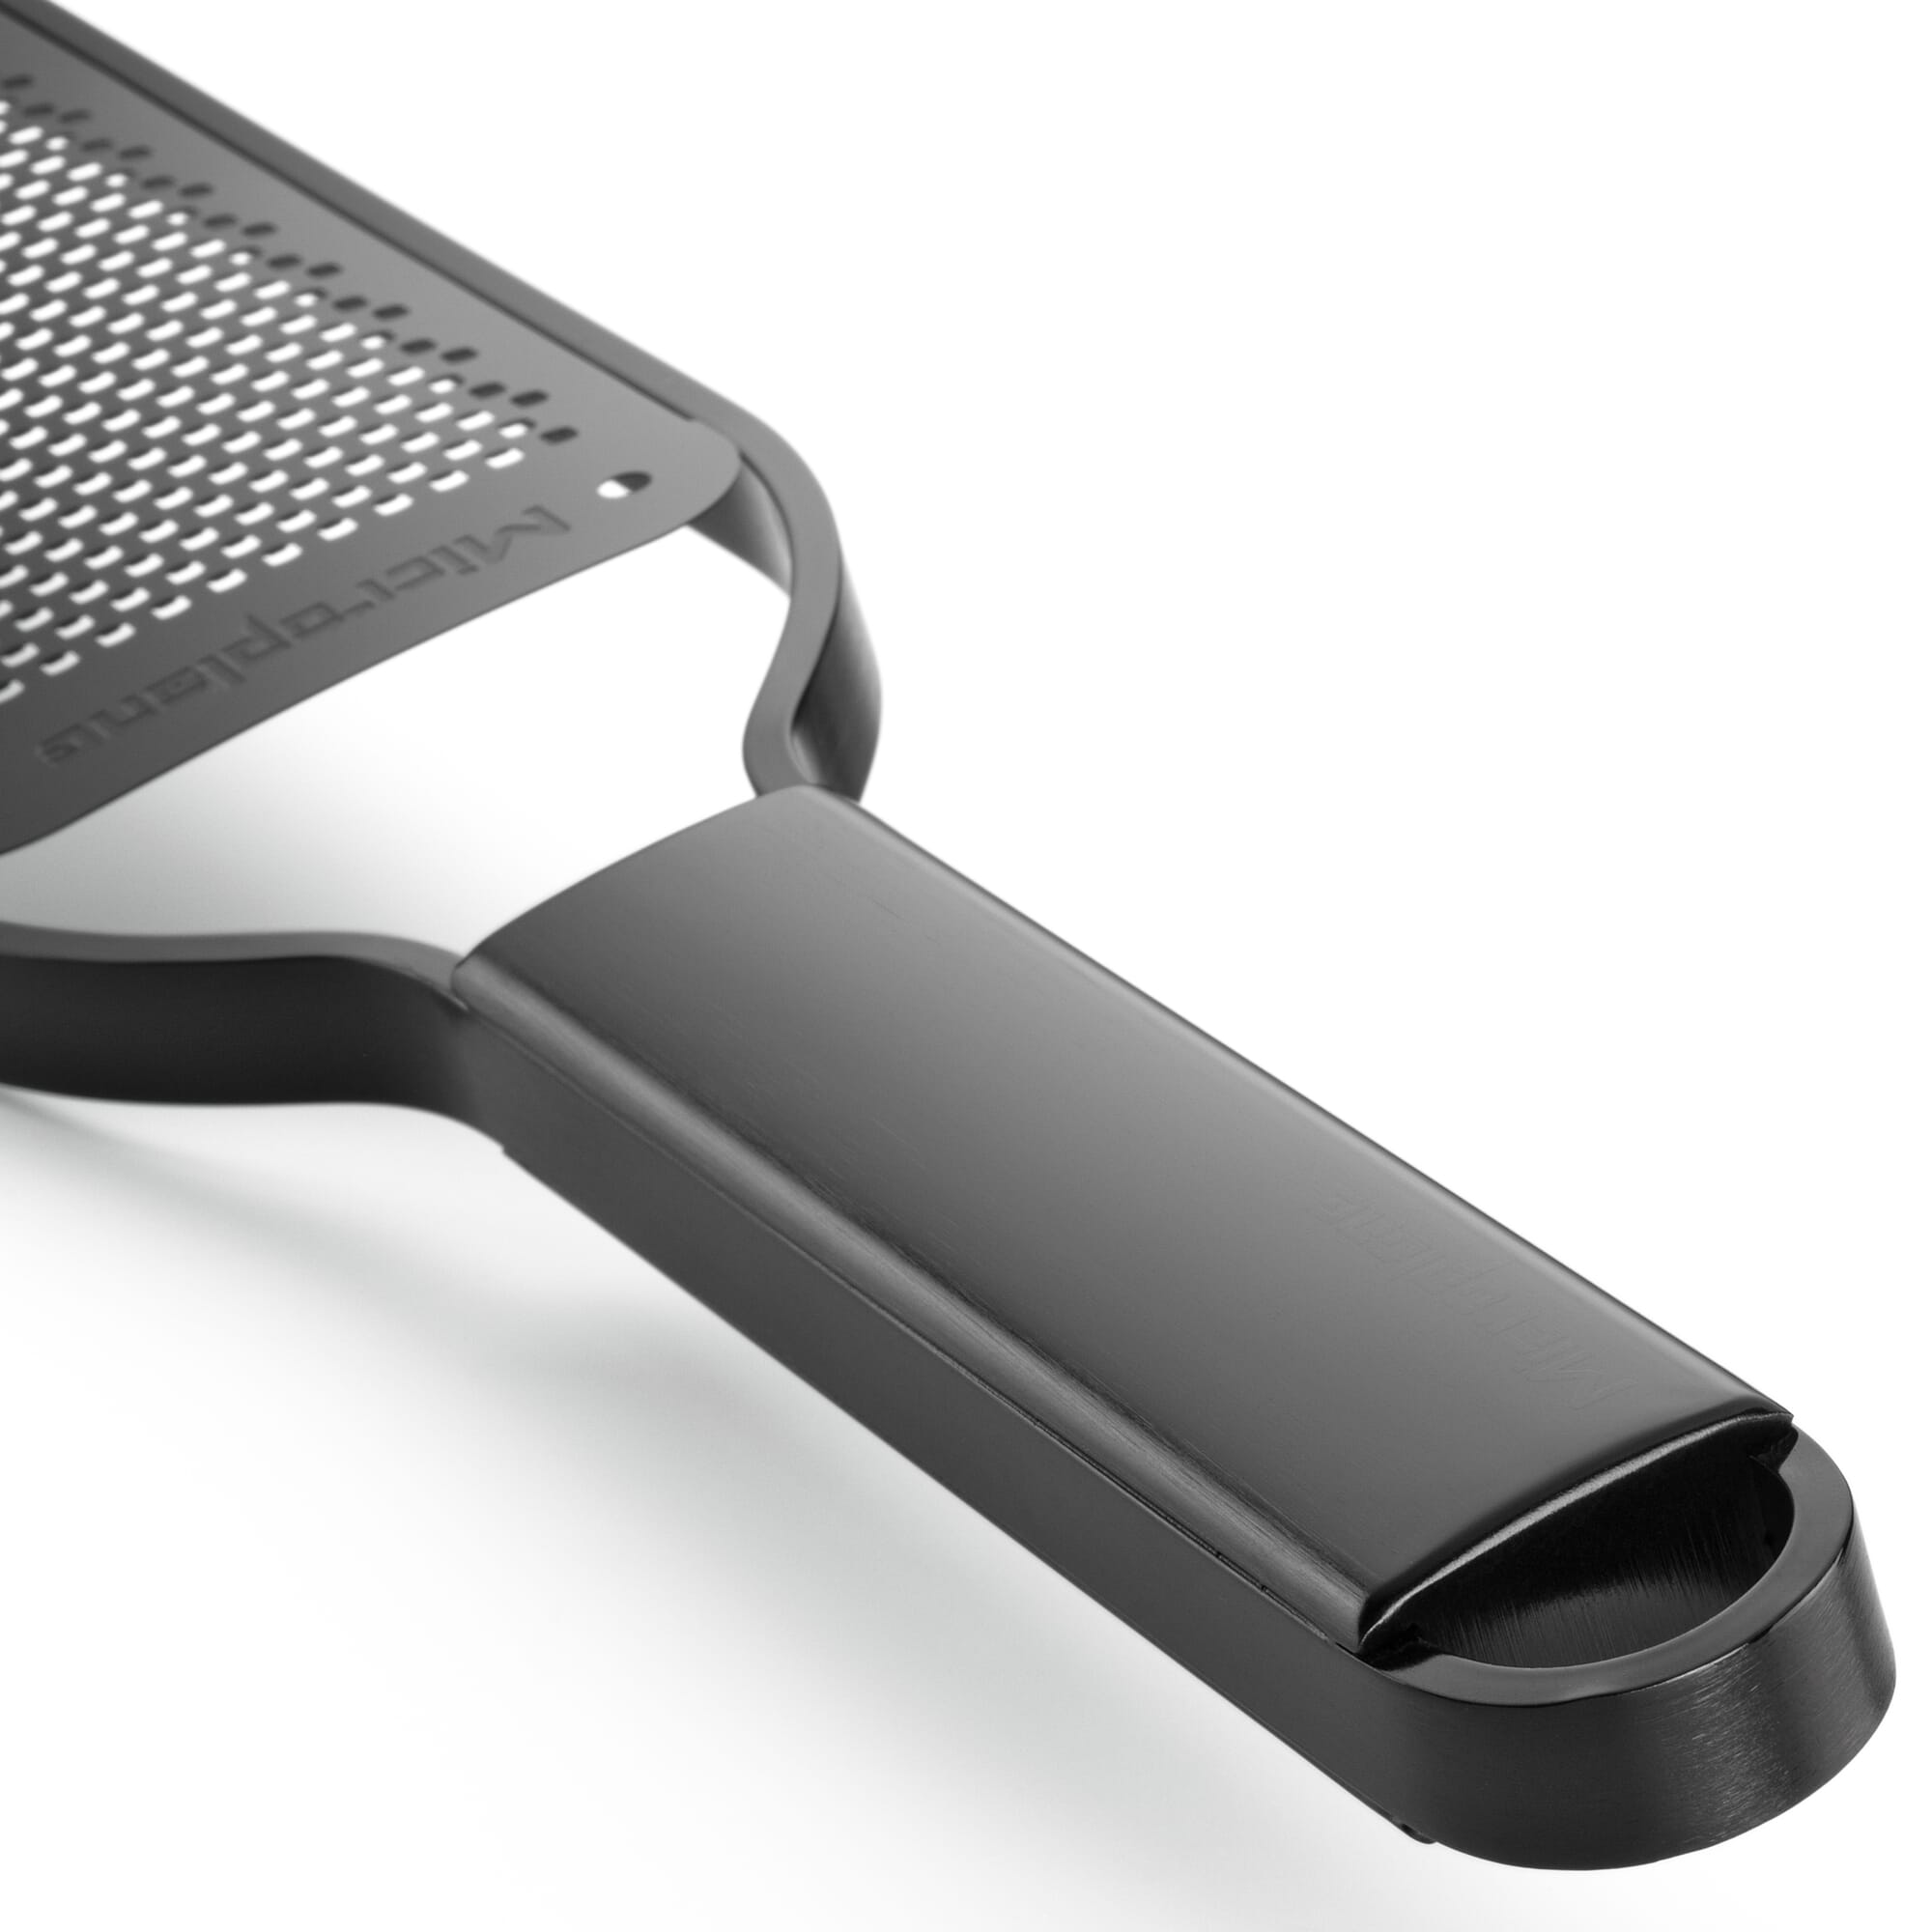 Microplane grater, a fine, stainless steel - Knife Union